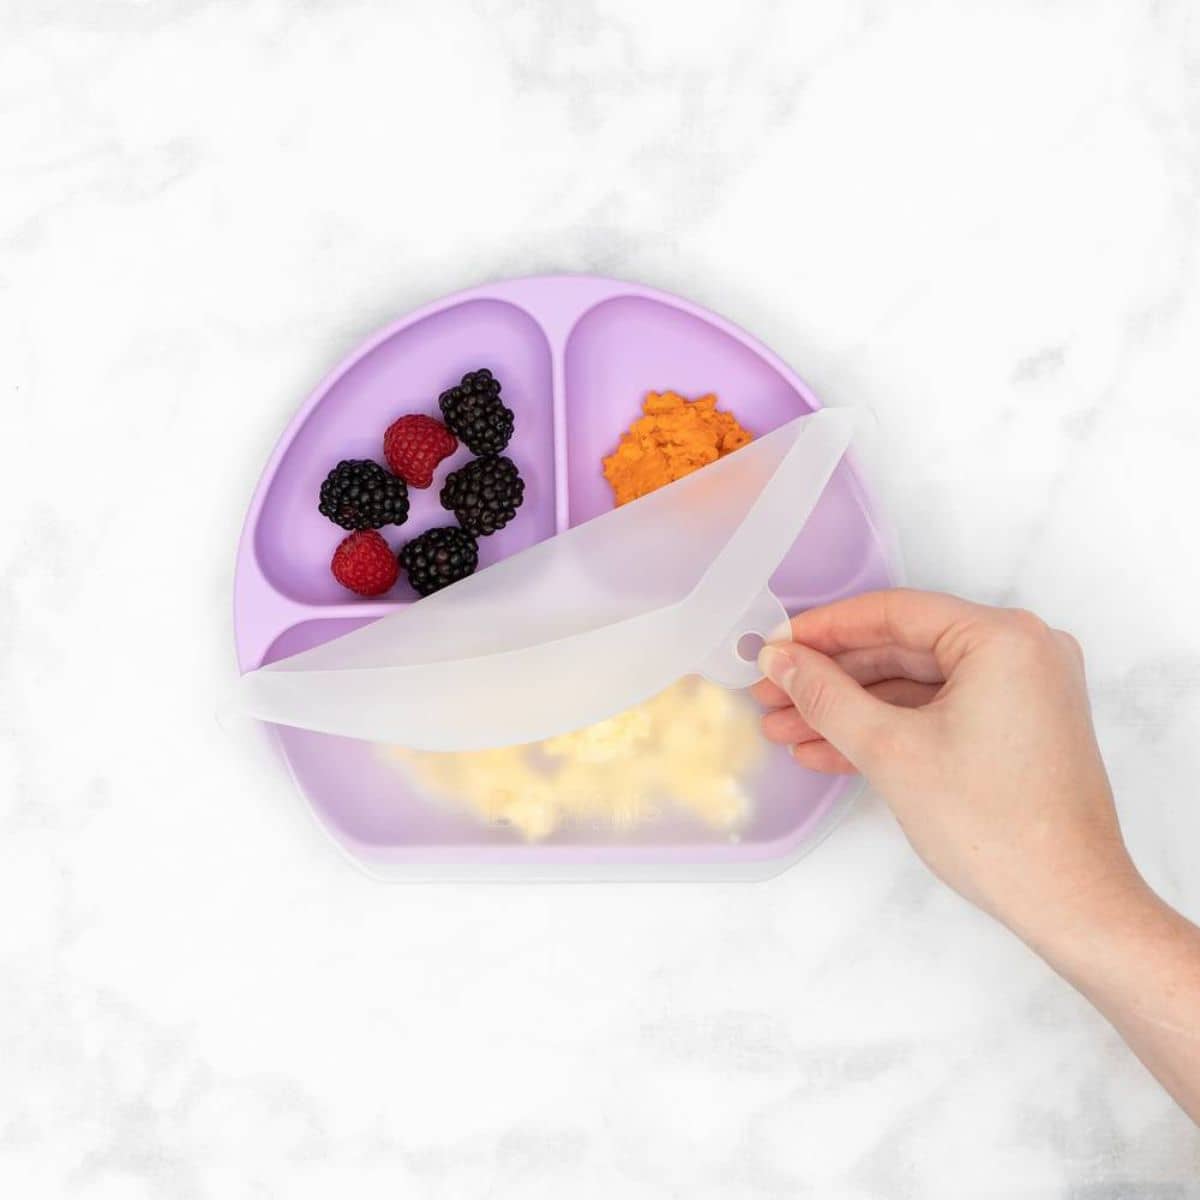 Bumkins Silicone Grip Dish with Lid